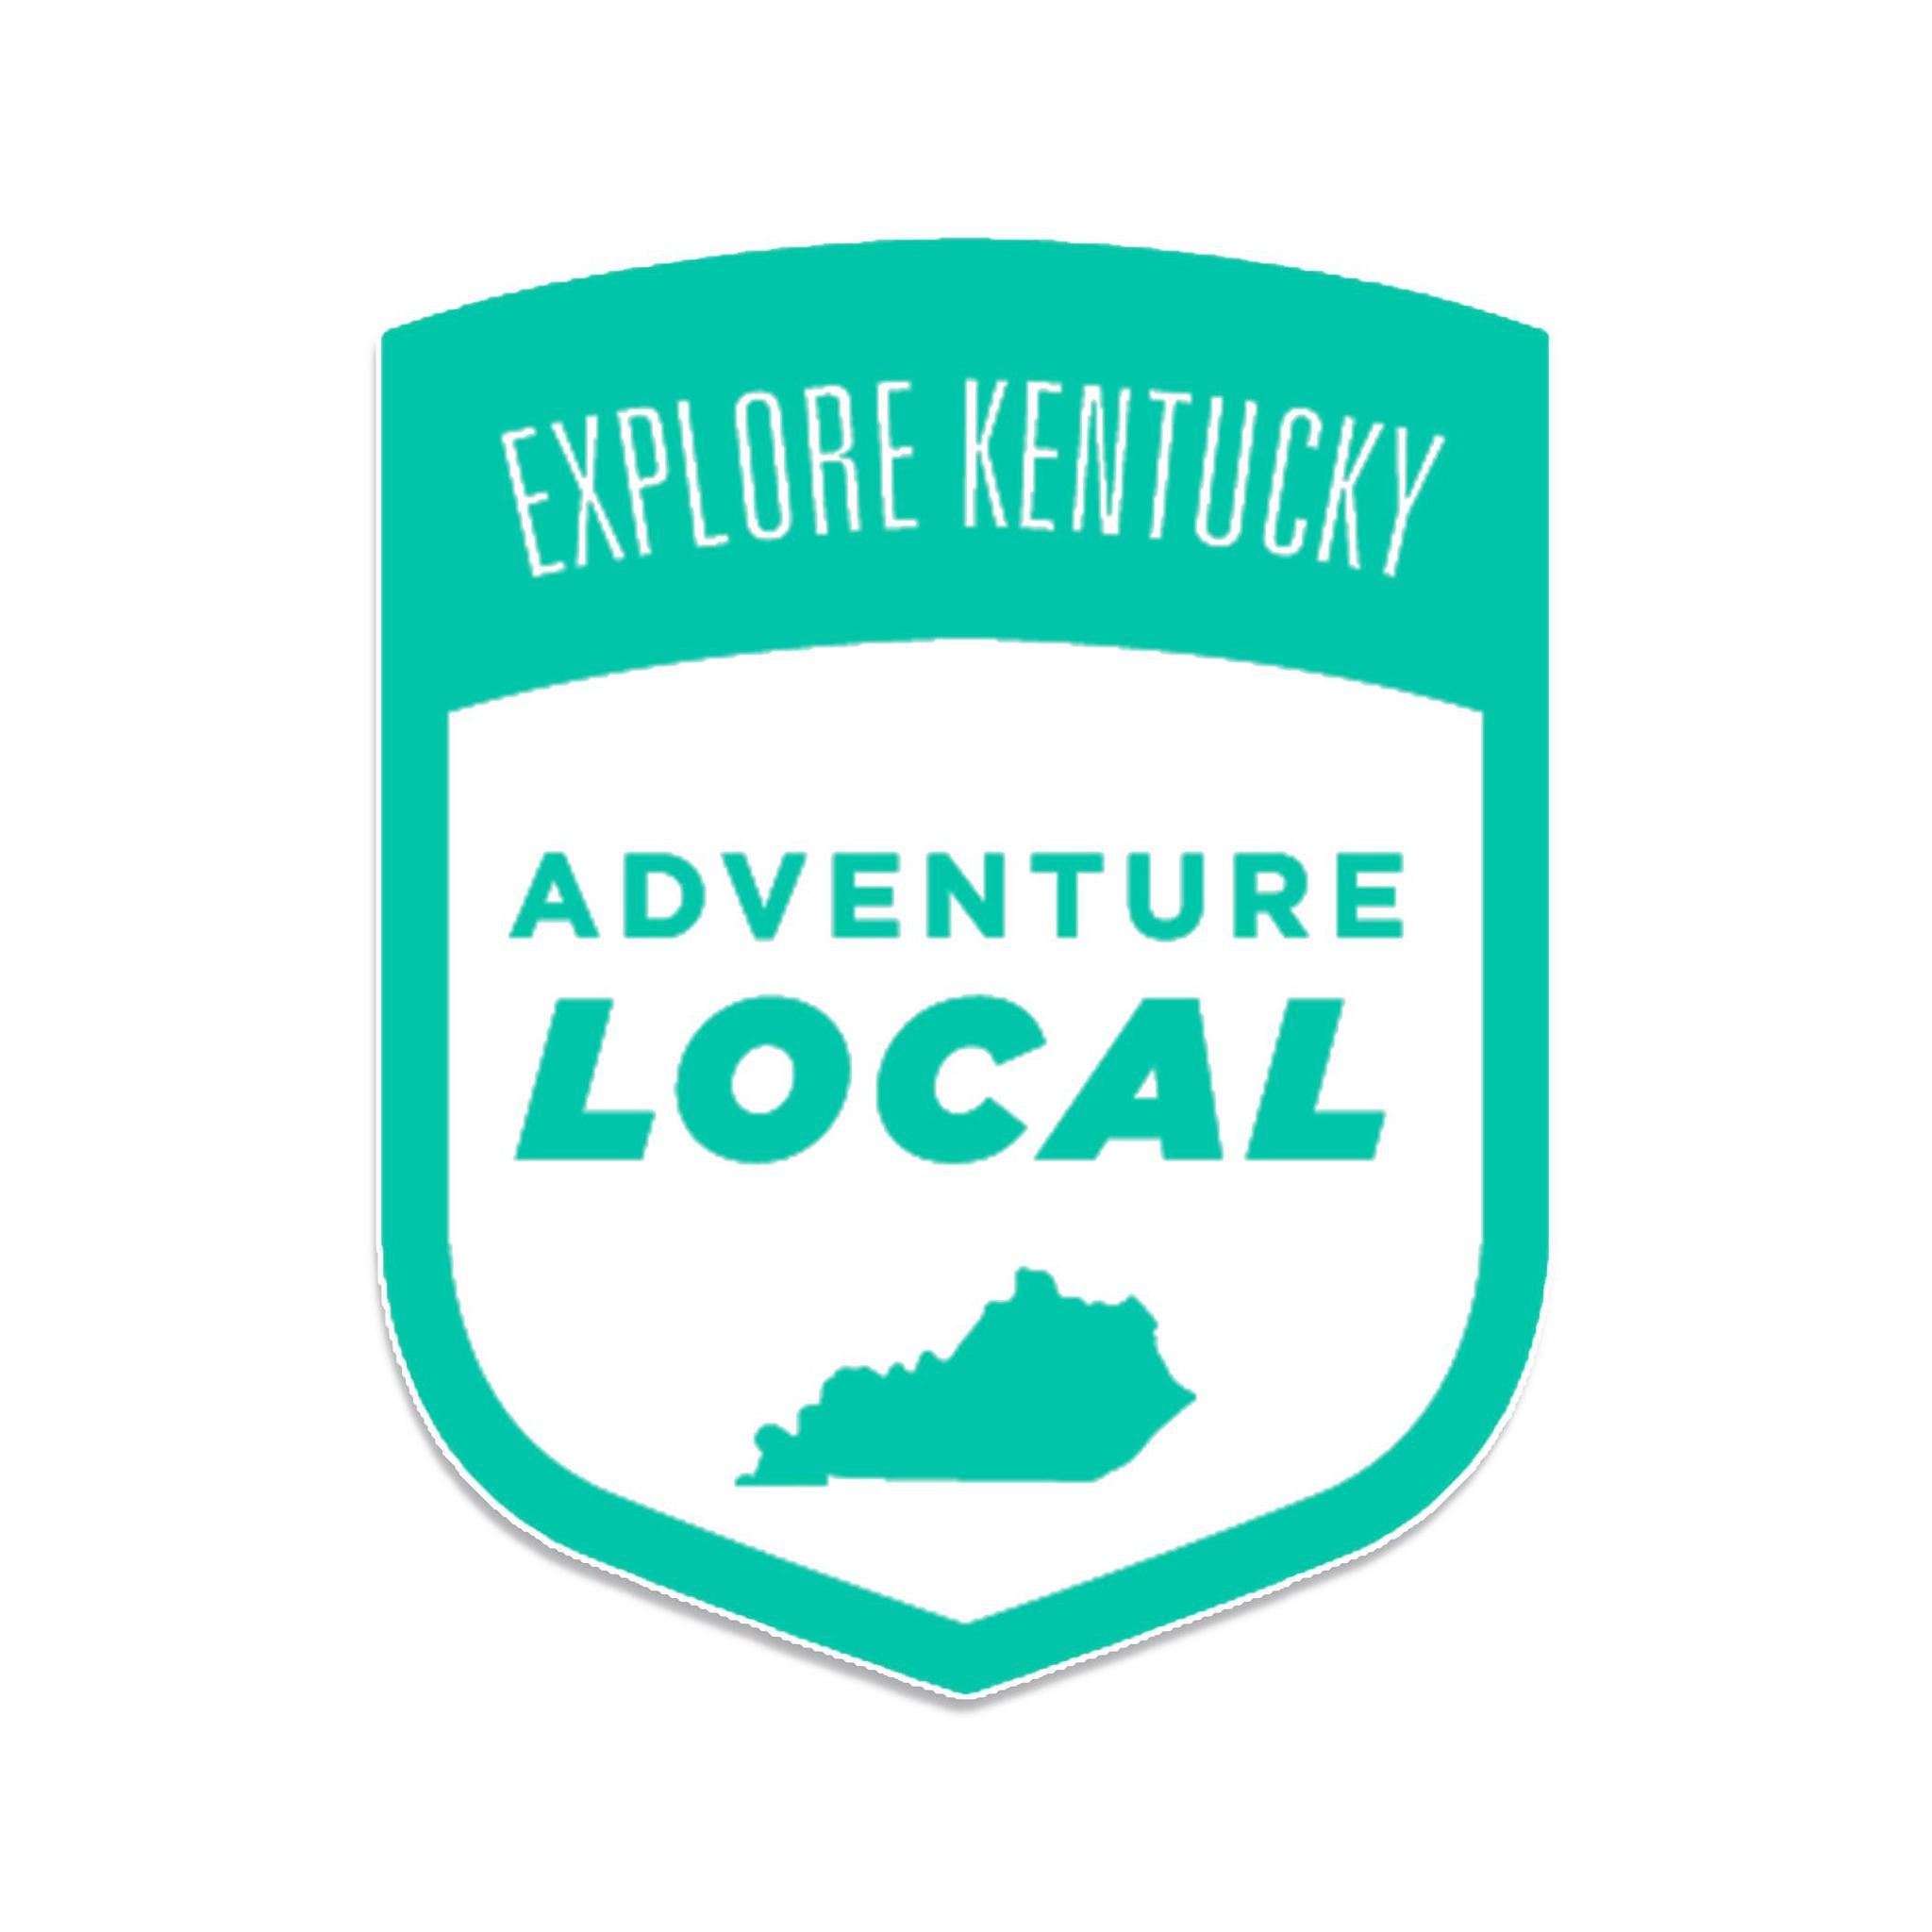 Explore Kentucky's Adventure Local Sticker (Mint Green)-Stickers-KY for KY Store